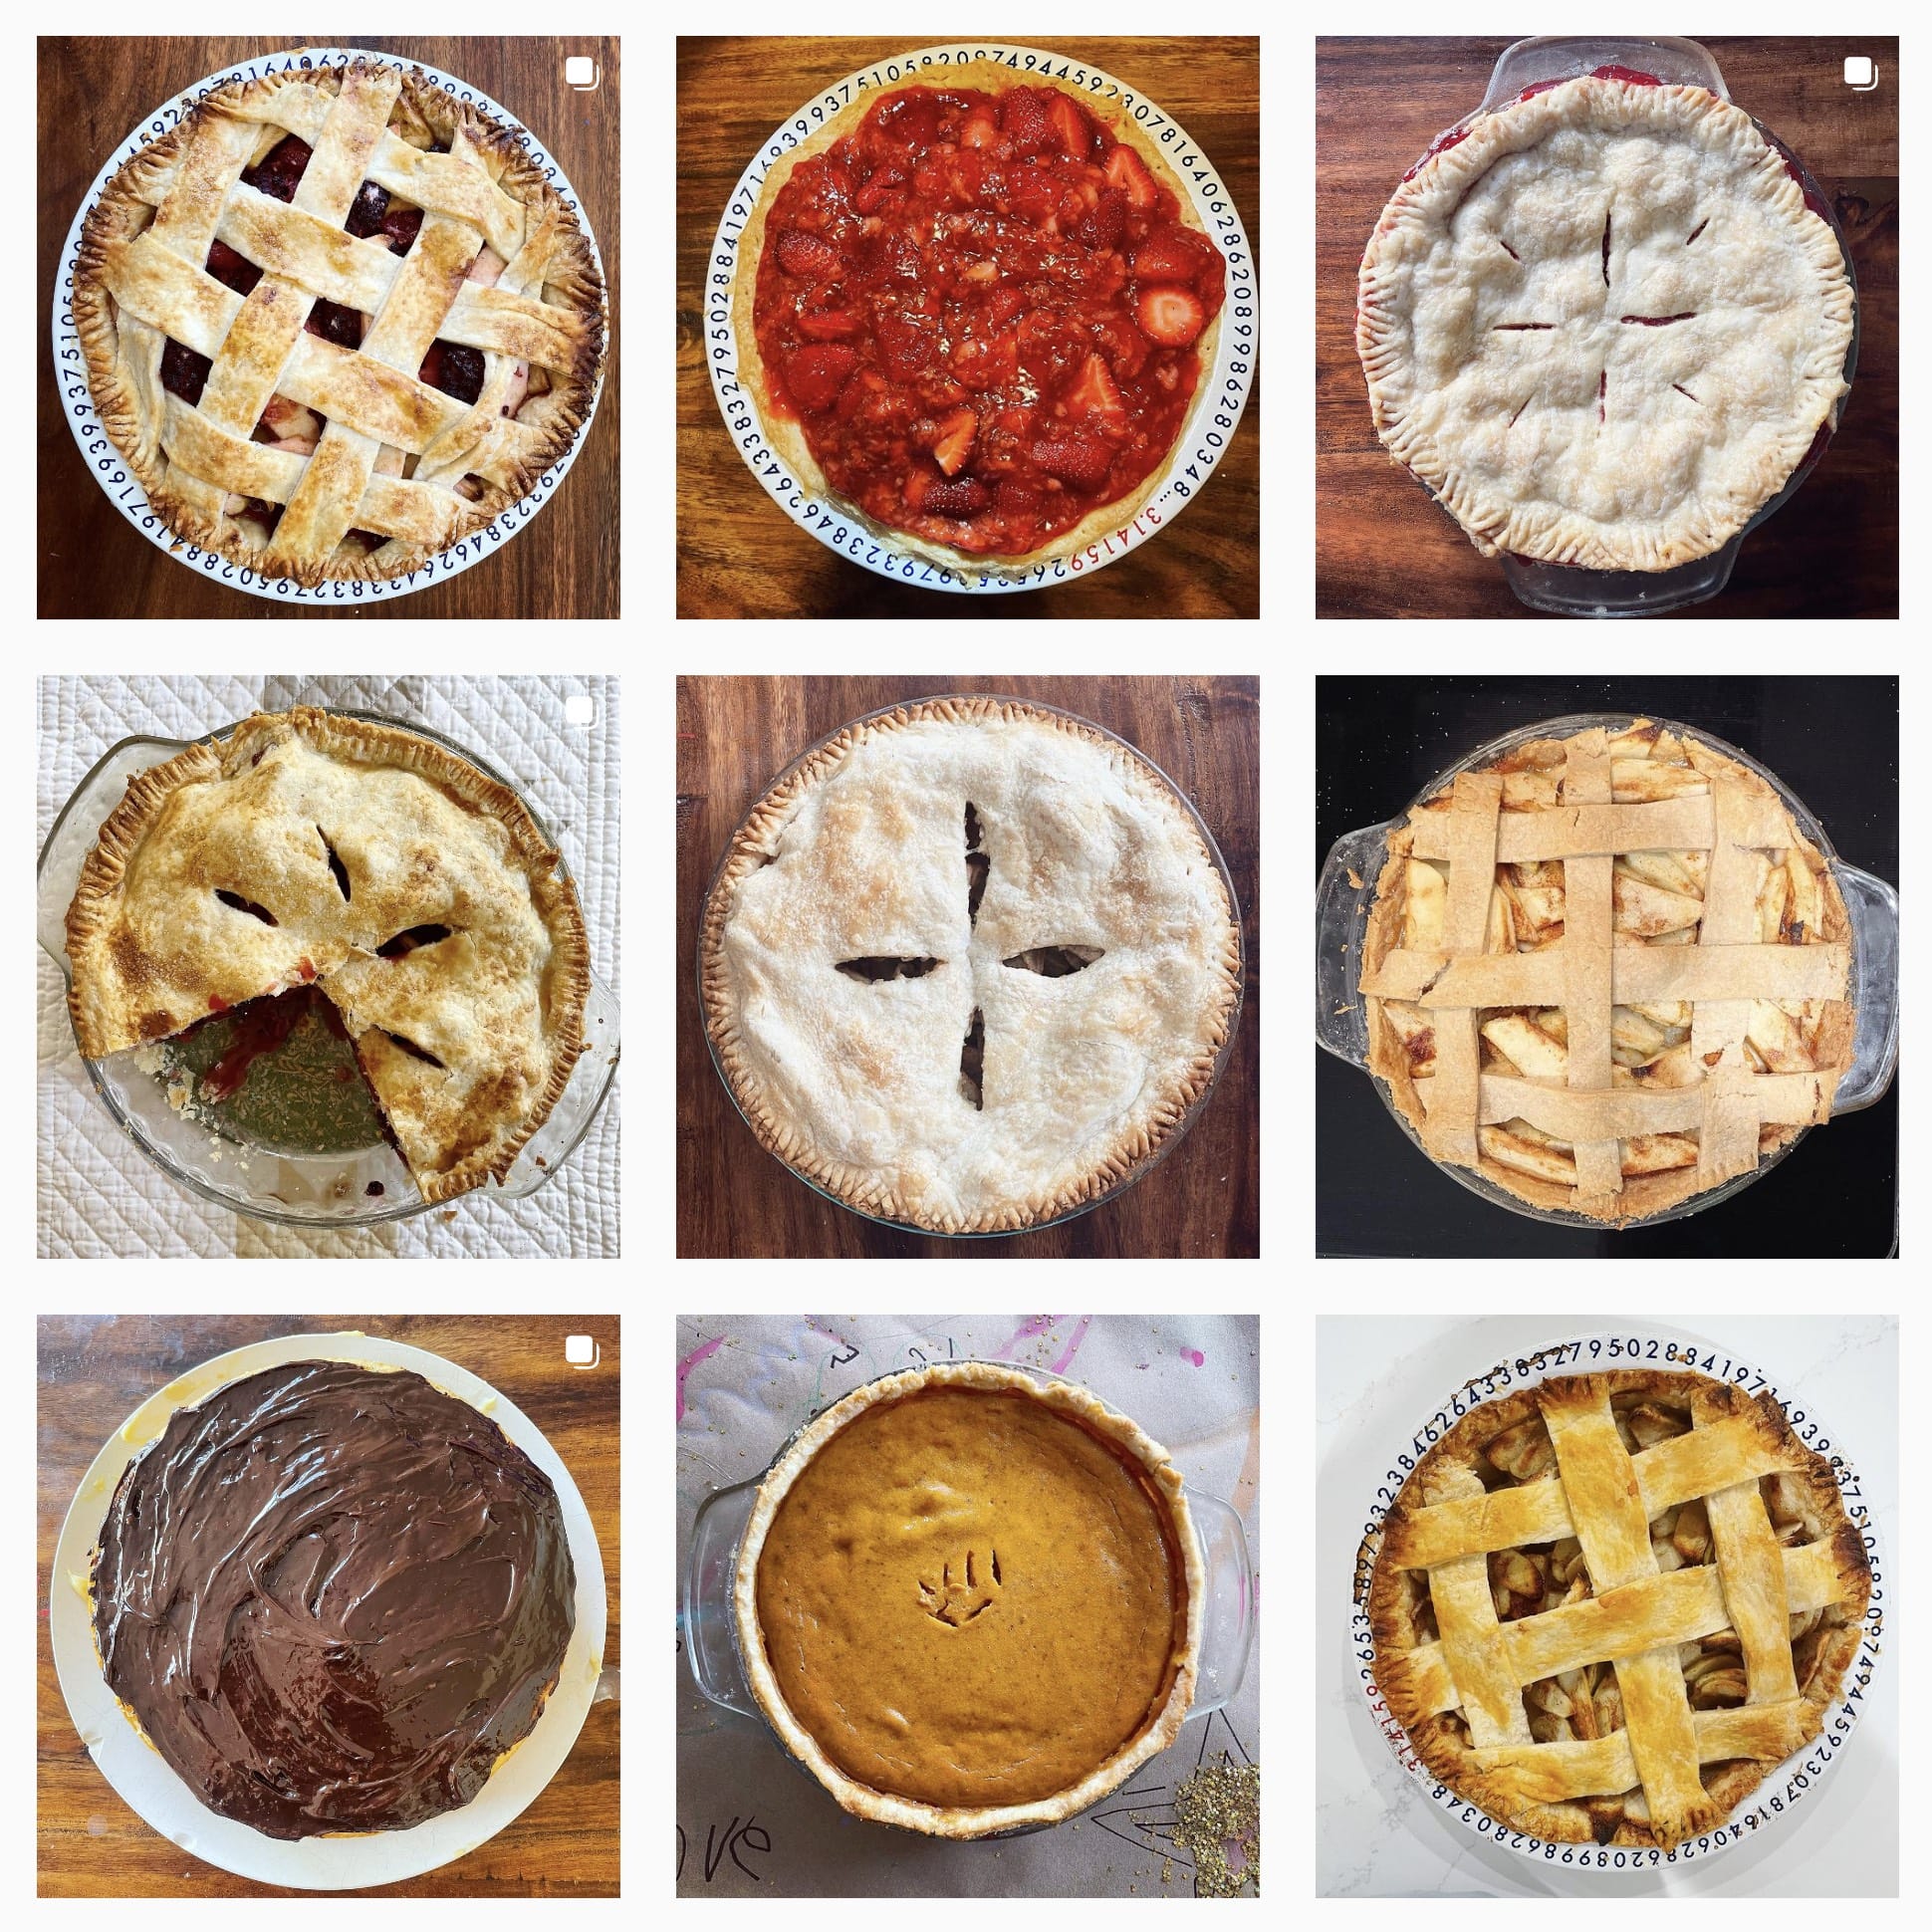 A collection of 9 photographs of different pies I’ve baked. One is visibly pumpkin. One is visibly strawberry. Three are covered by lattice tops and three more are covered completely with only slits in the top, making the type of pie undiscrenable.